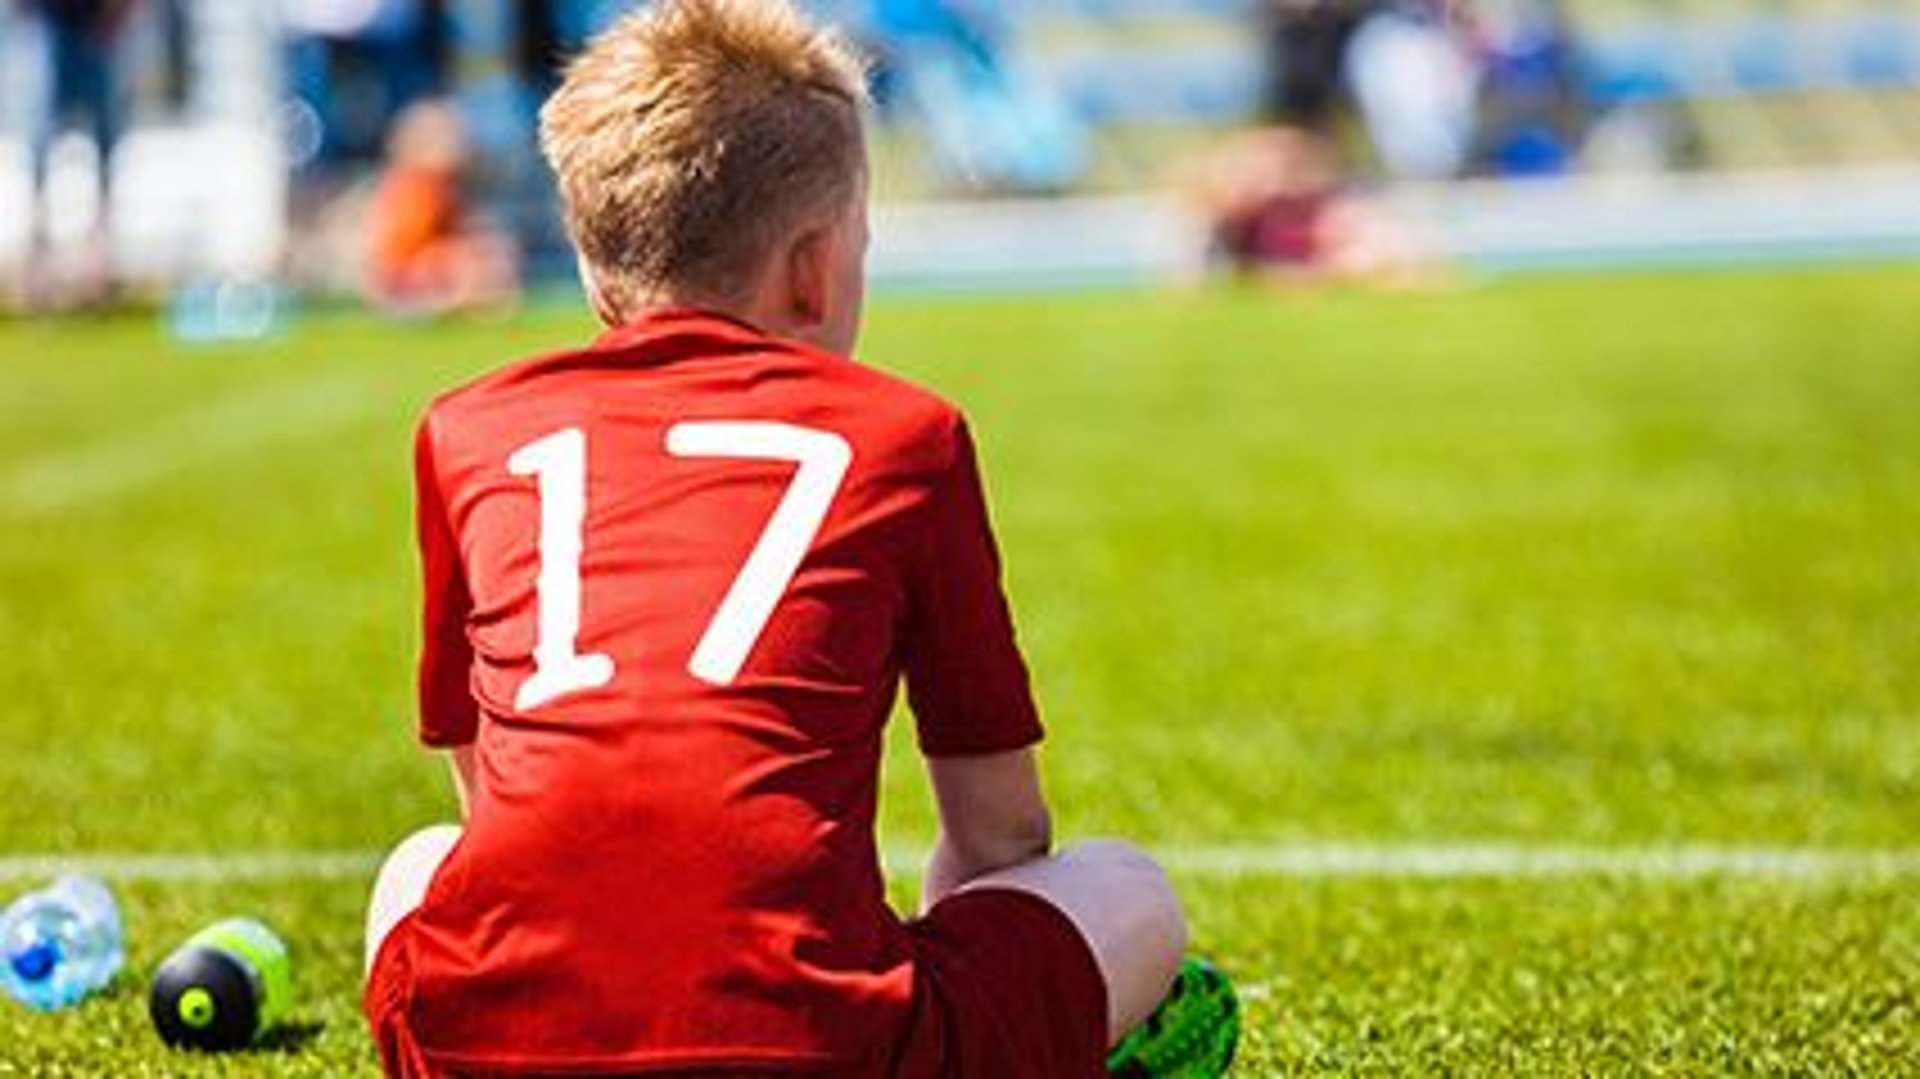 Sports Might Be Good Therapy for Boys With Behavioral Issues: Study thumbnail